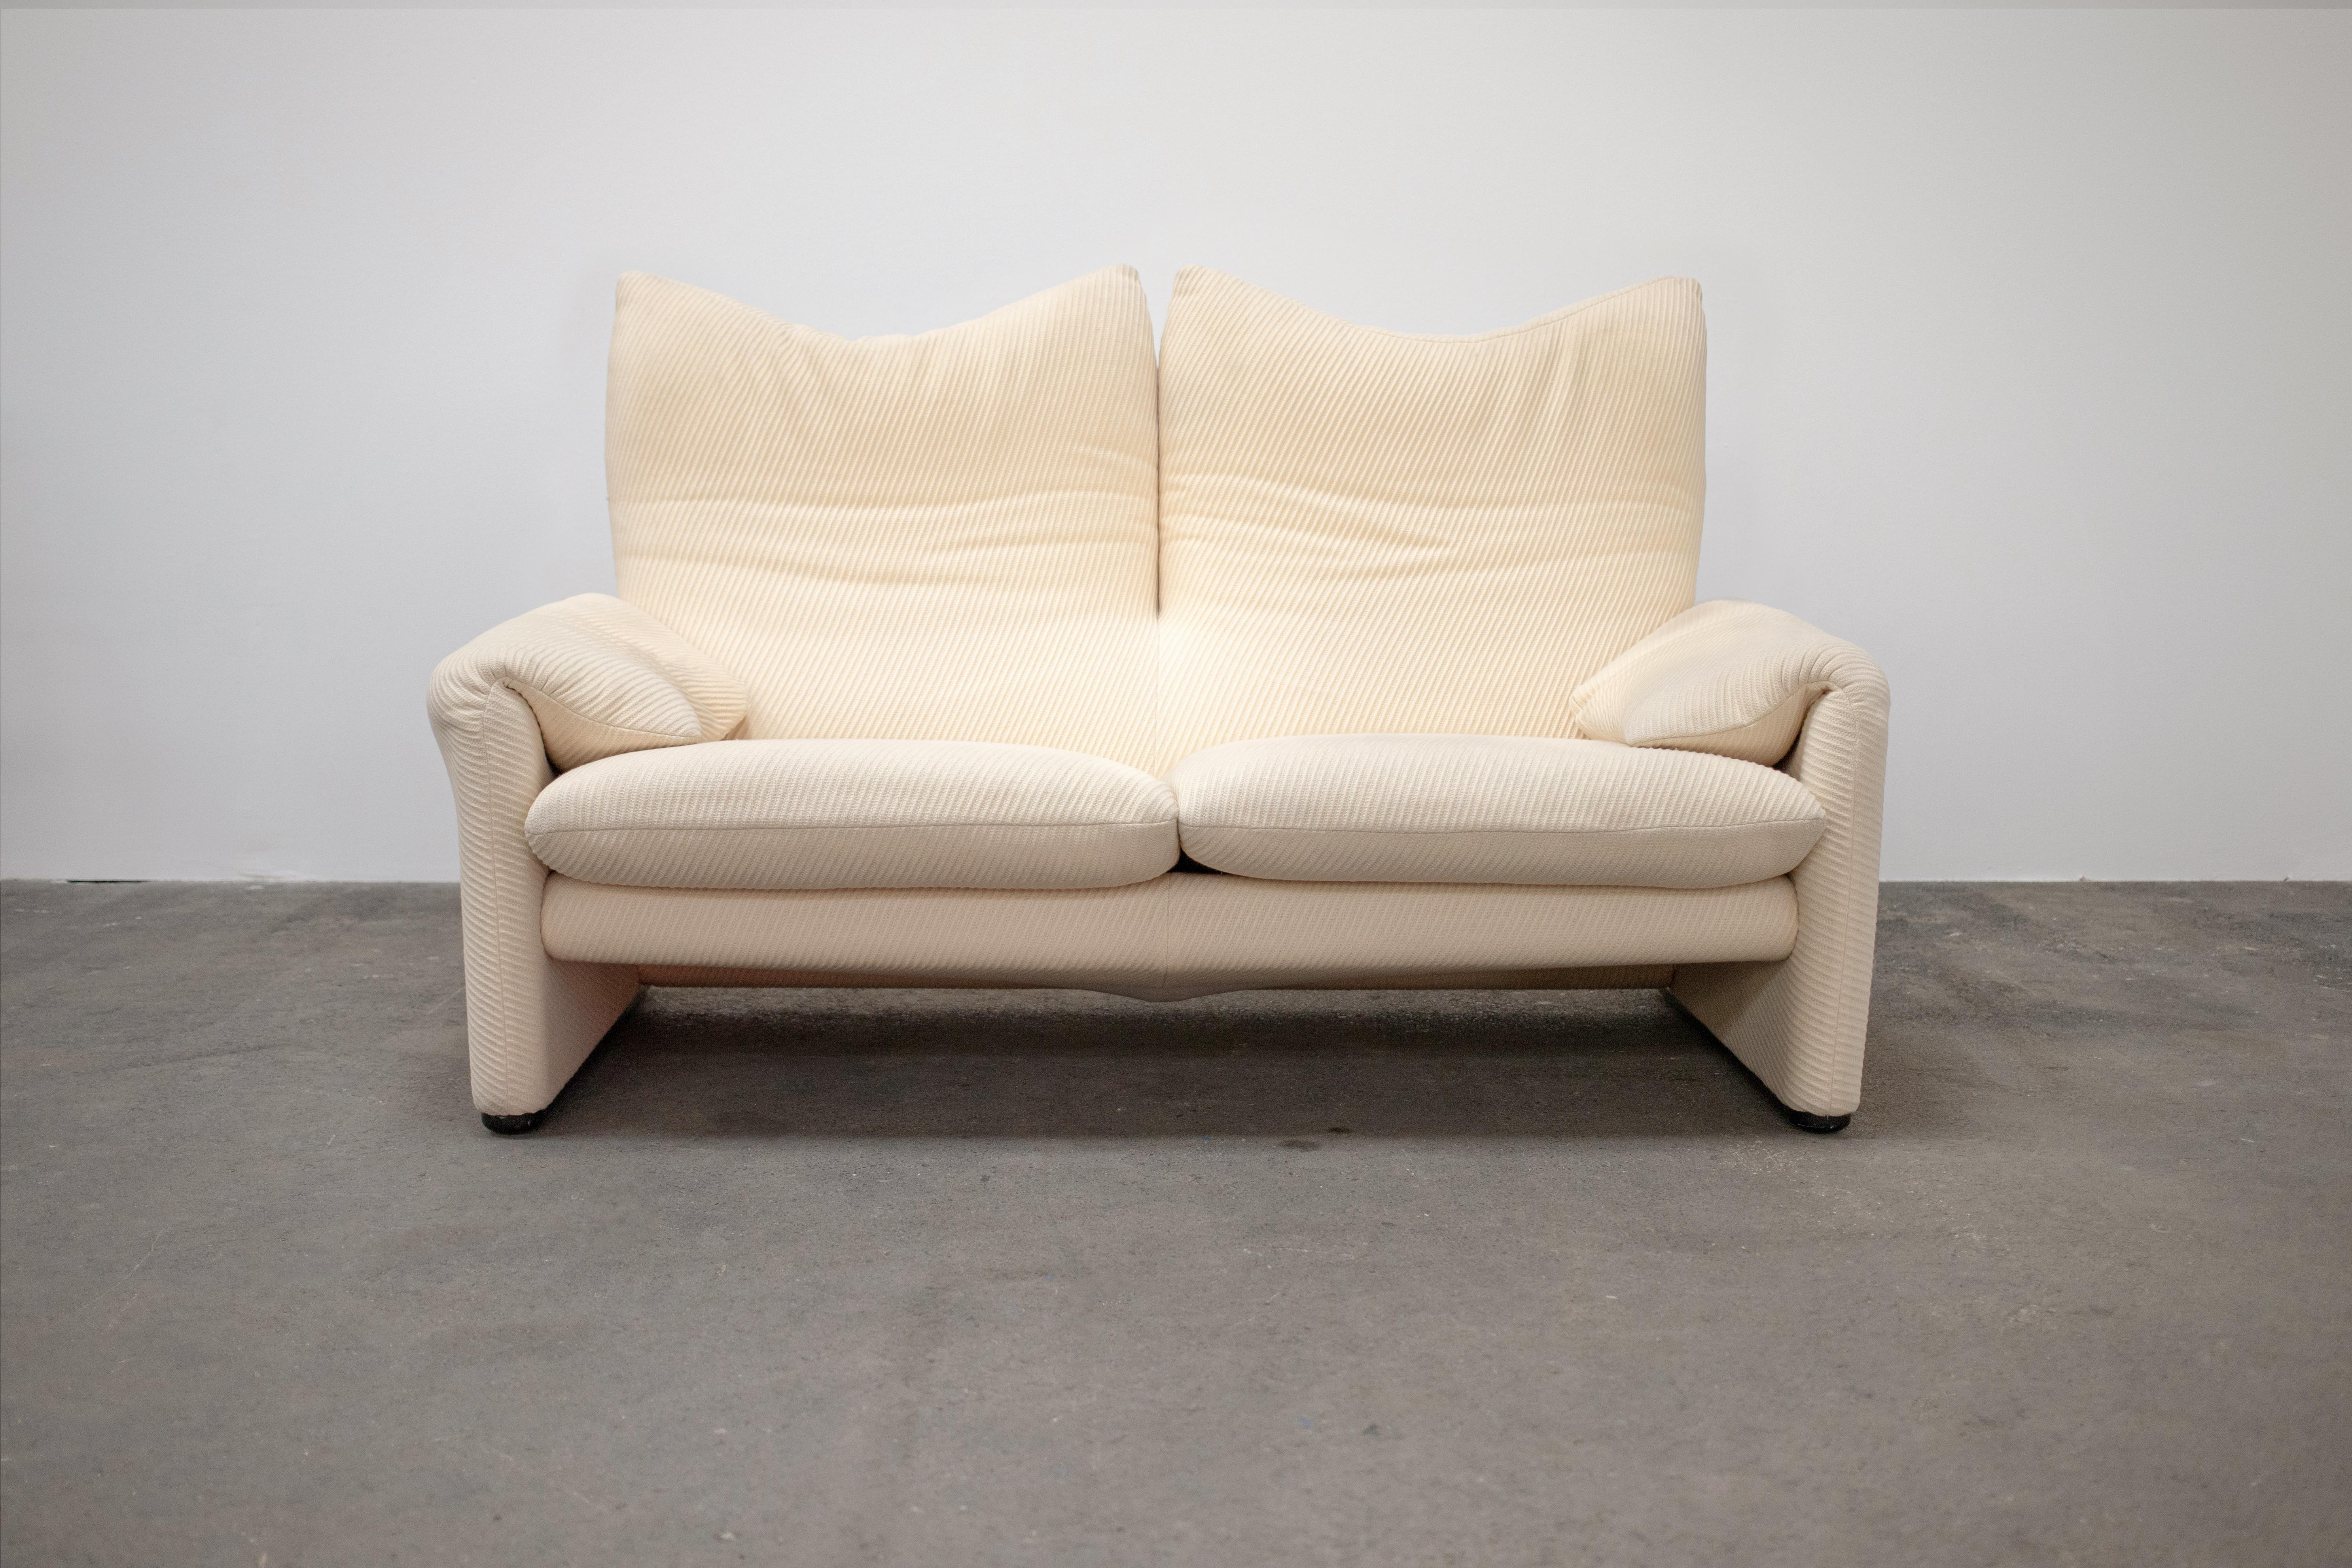 1970s Pair of 2-Seater Maralunga Sofas by Vico Magistretti for Cassina 2